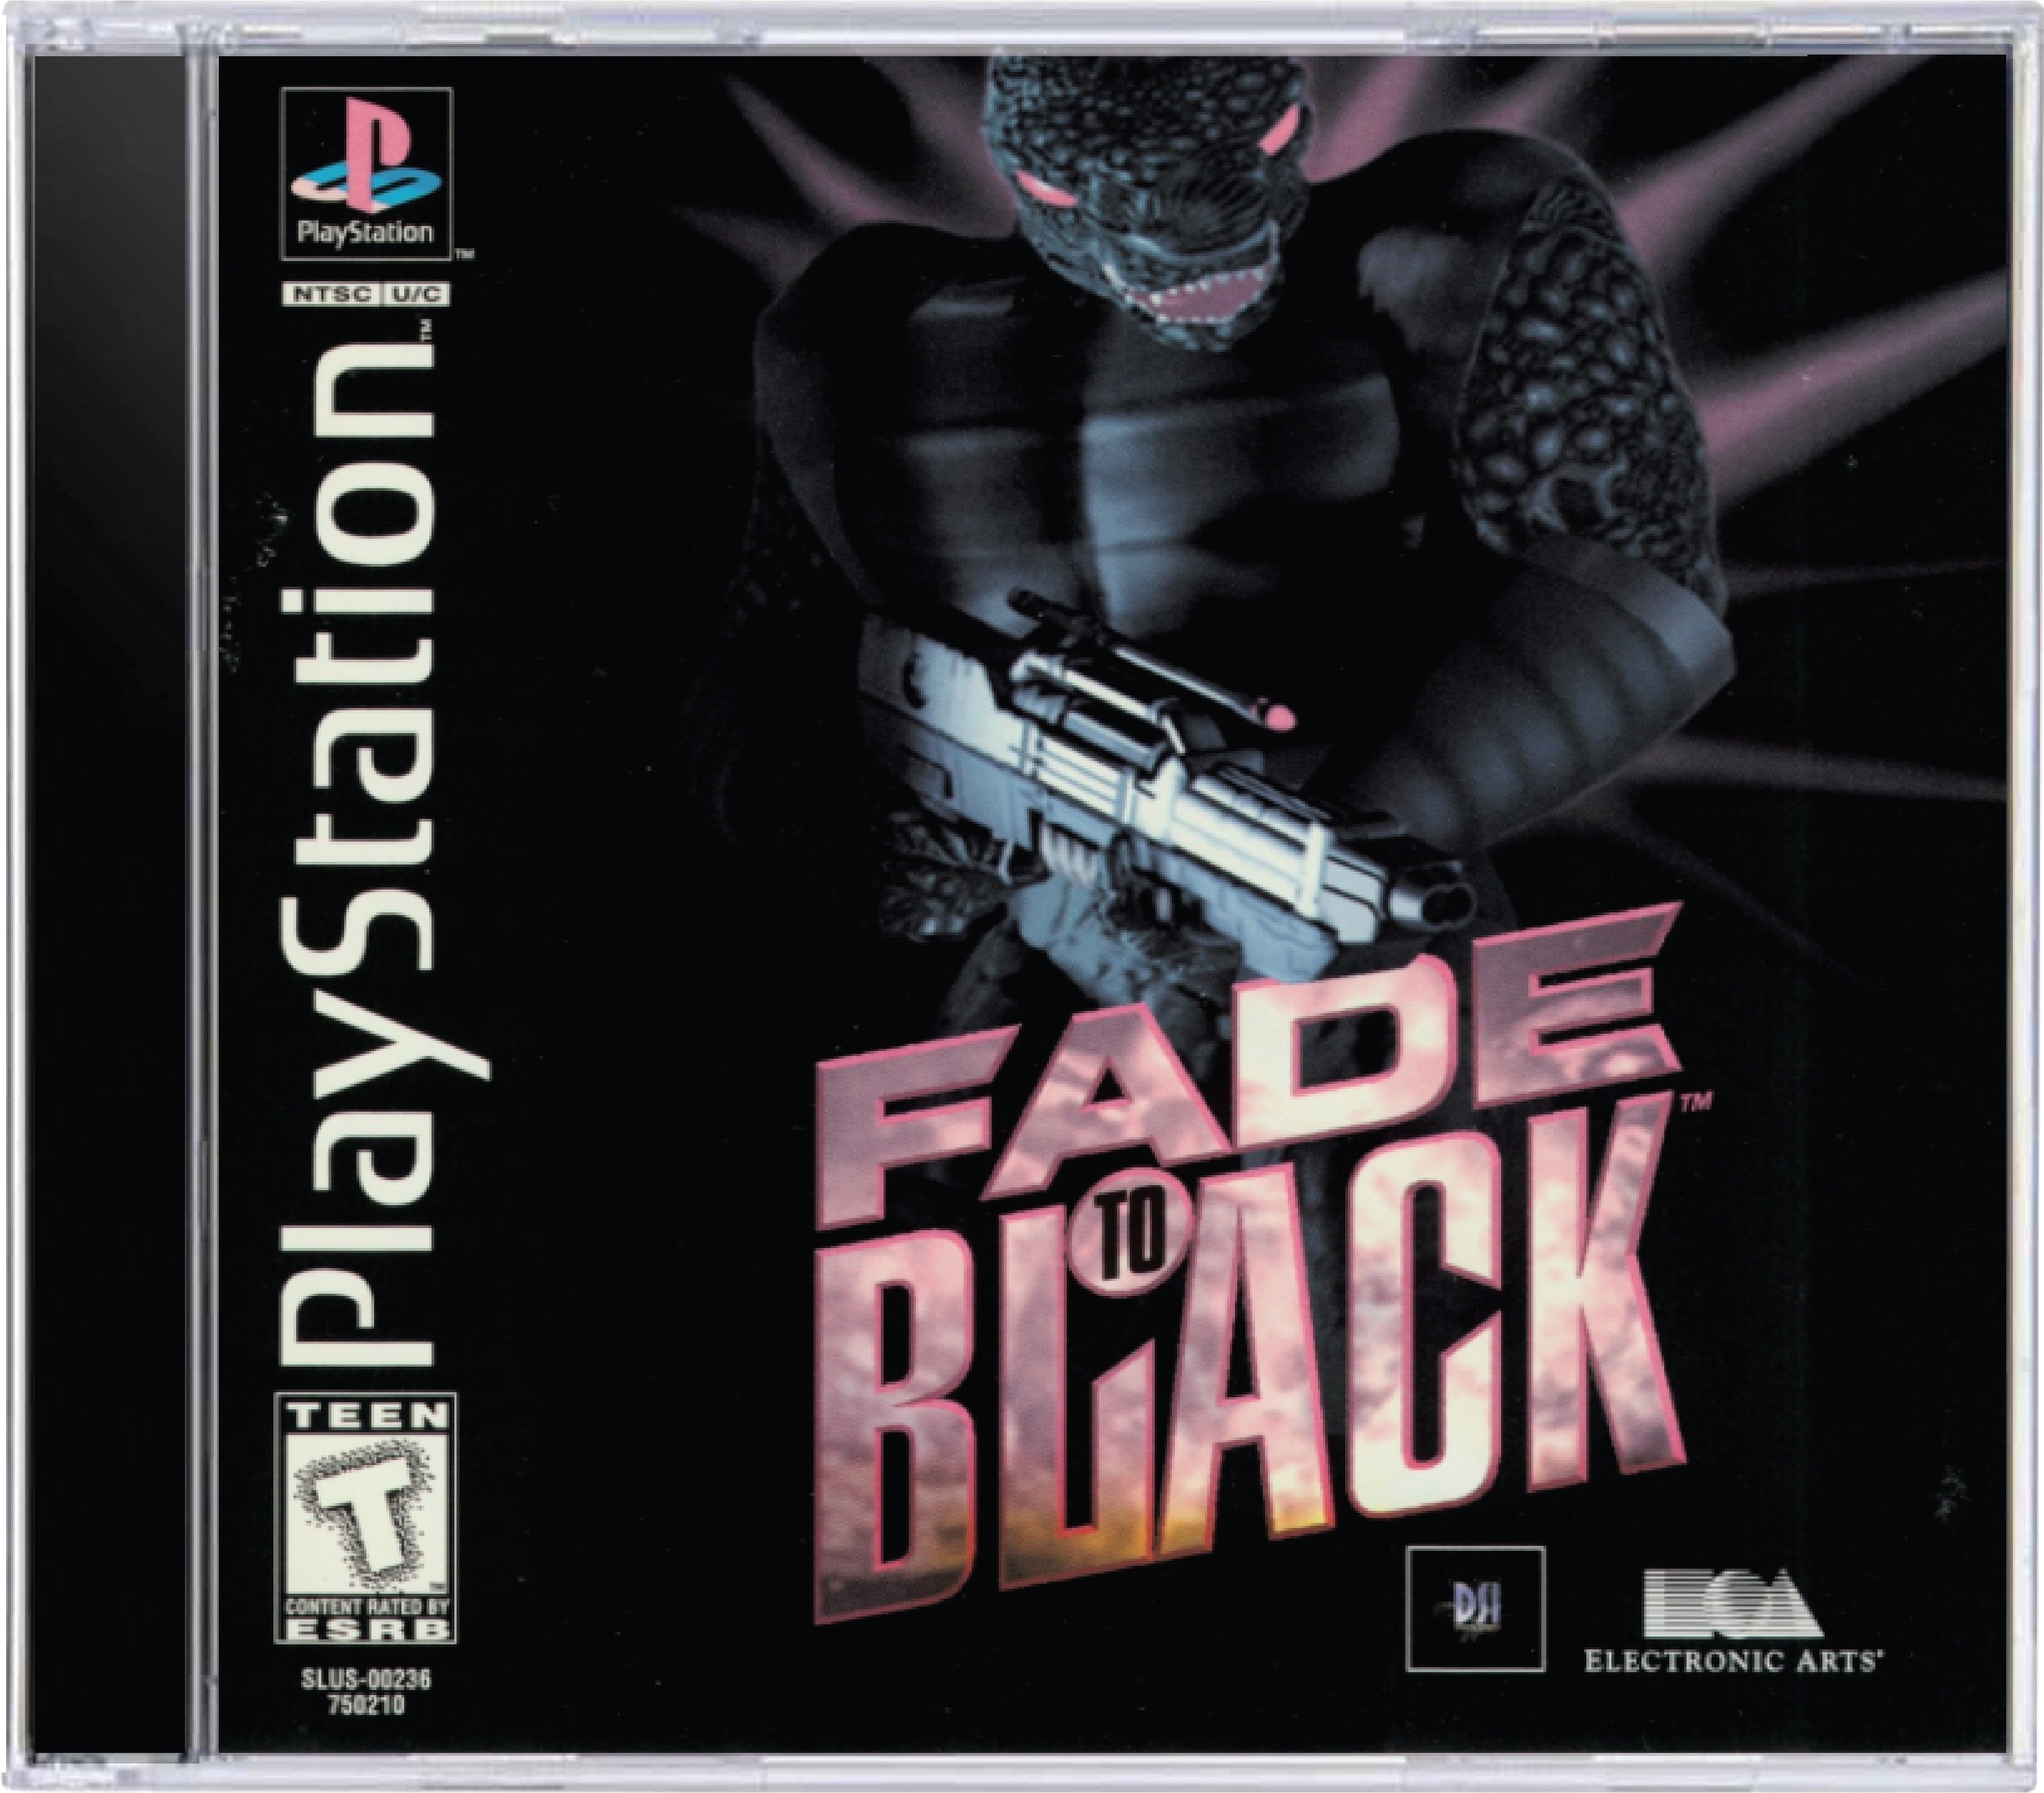 Fade to Black Cover Art and Product Photo